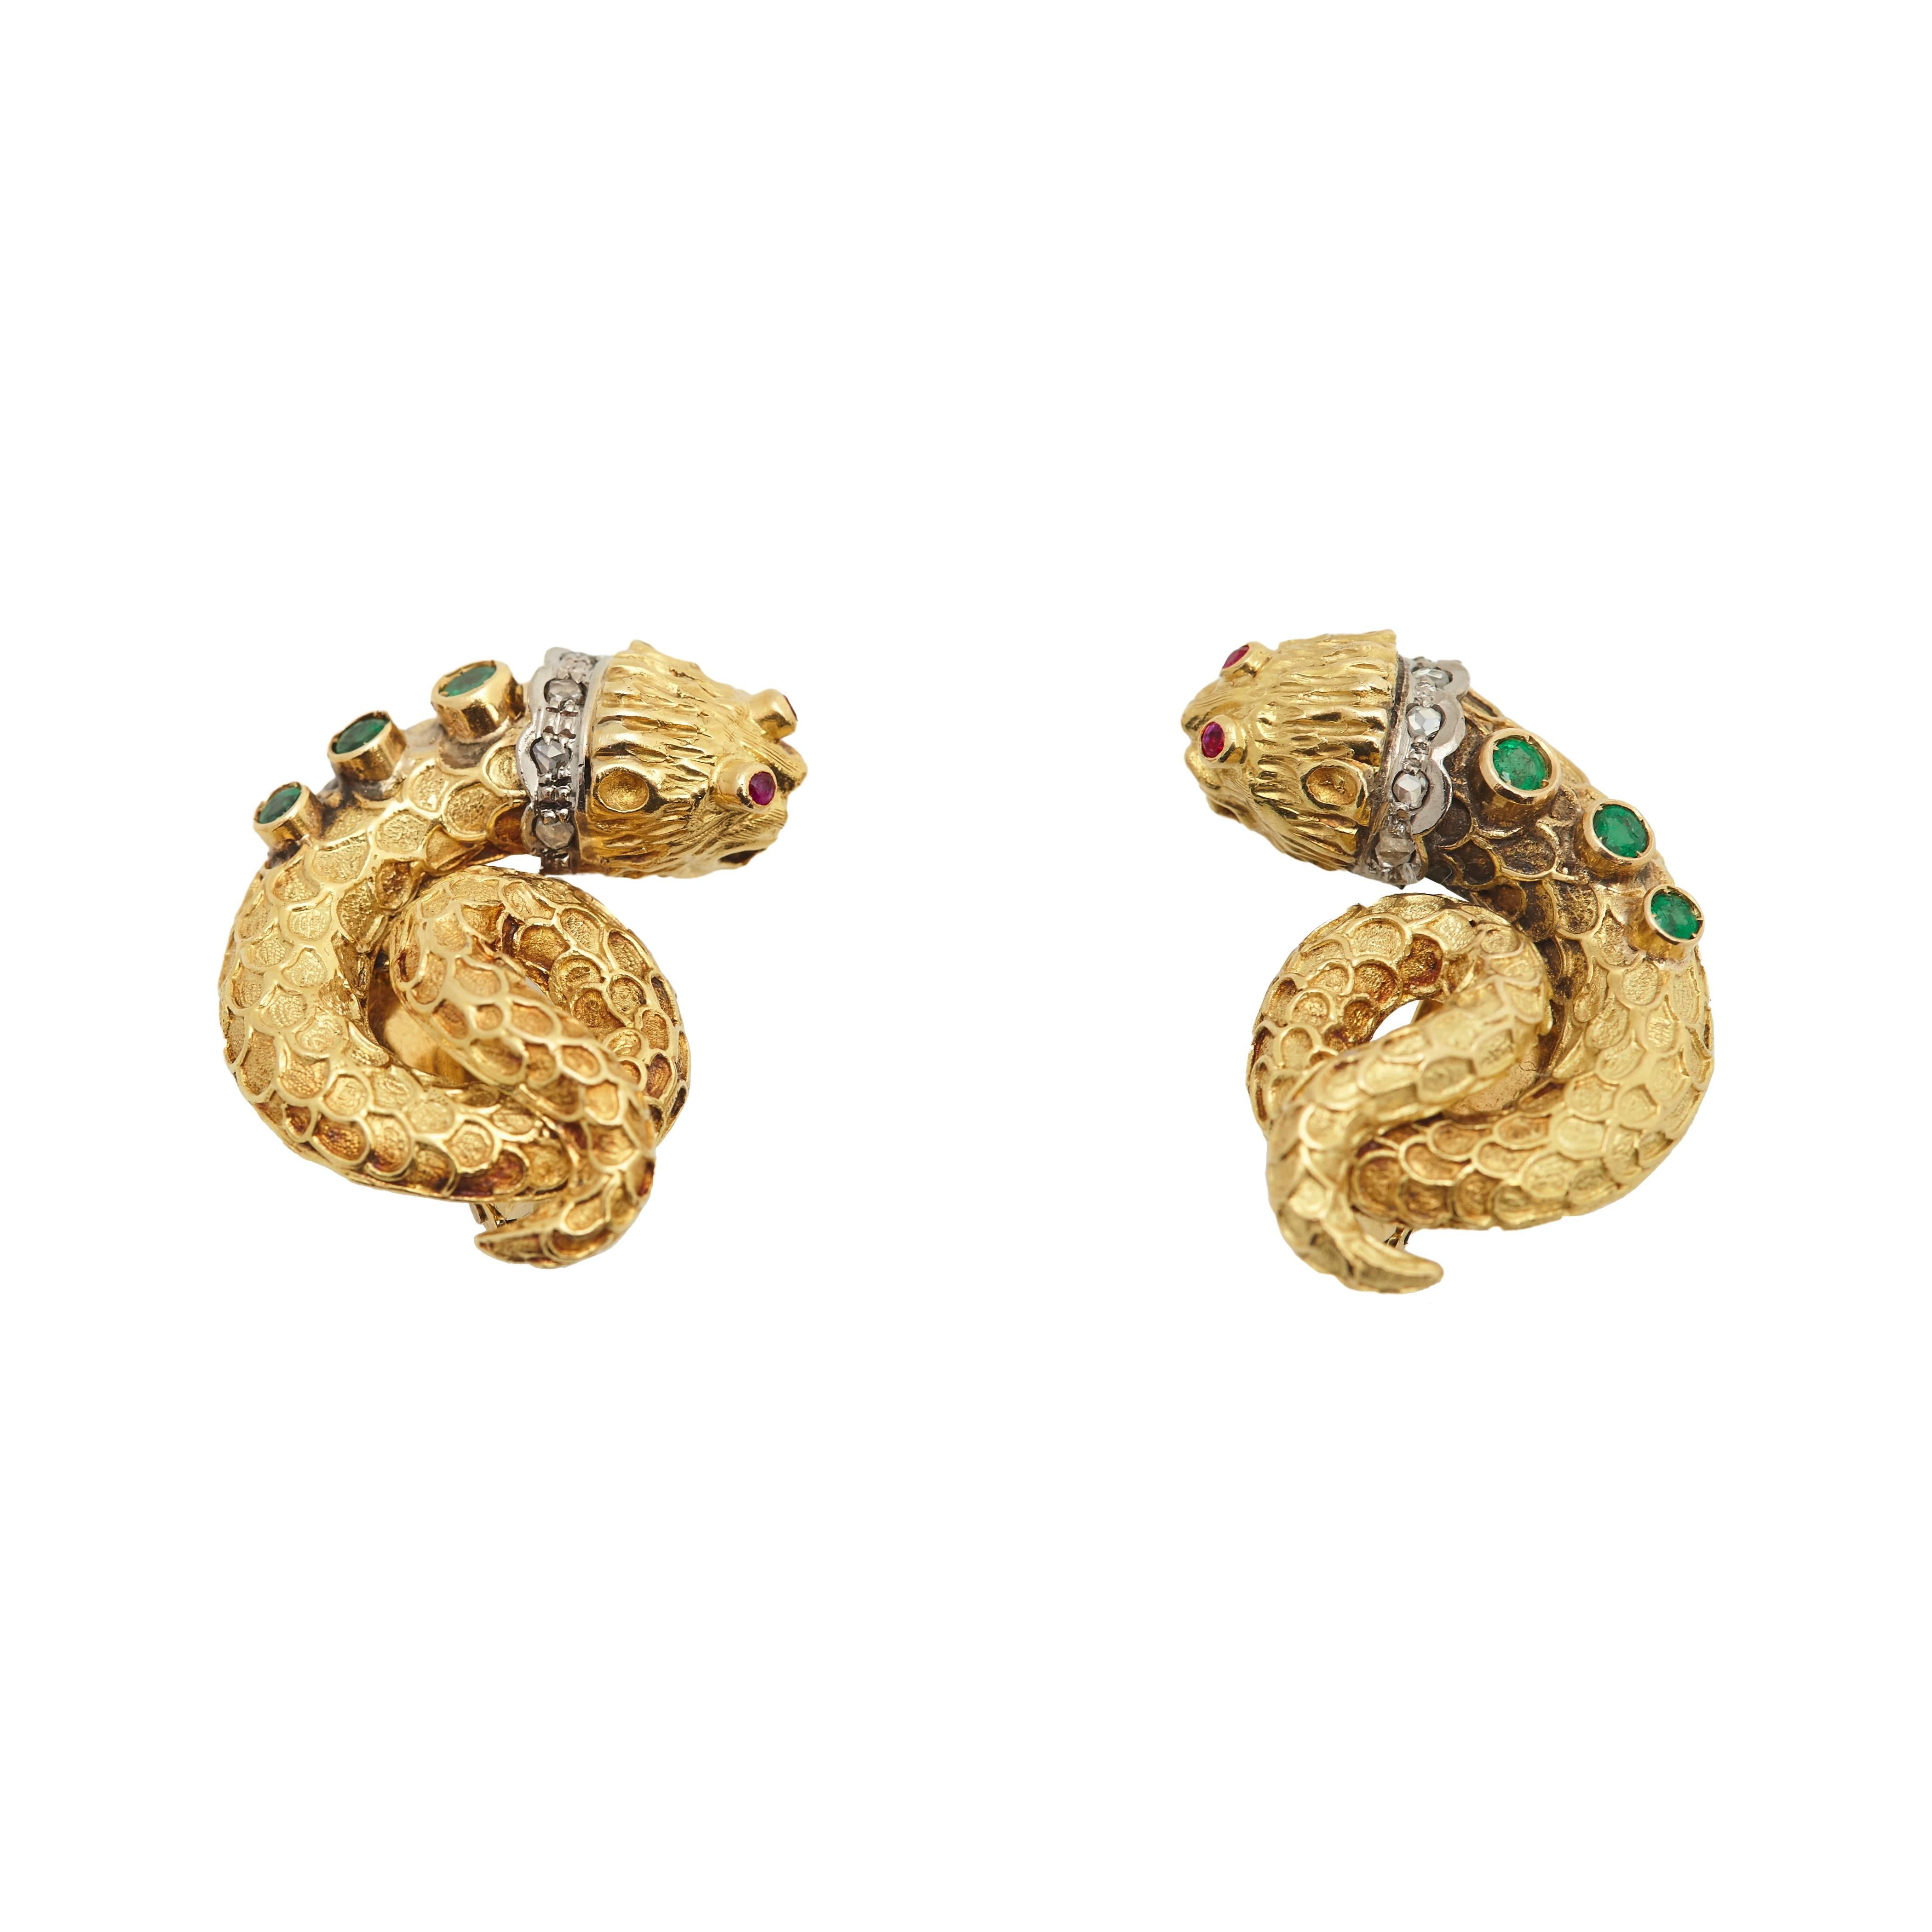 A peculiar set comprising earclips and ring, with emeralds and diamonds, representing water snakes, mounted on 18kt yellow gold. Made in Greece, circa 1975.